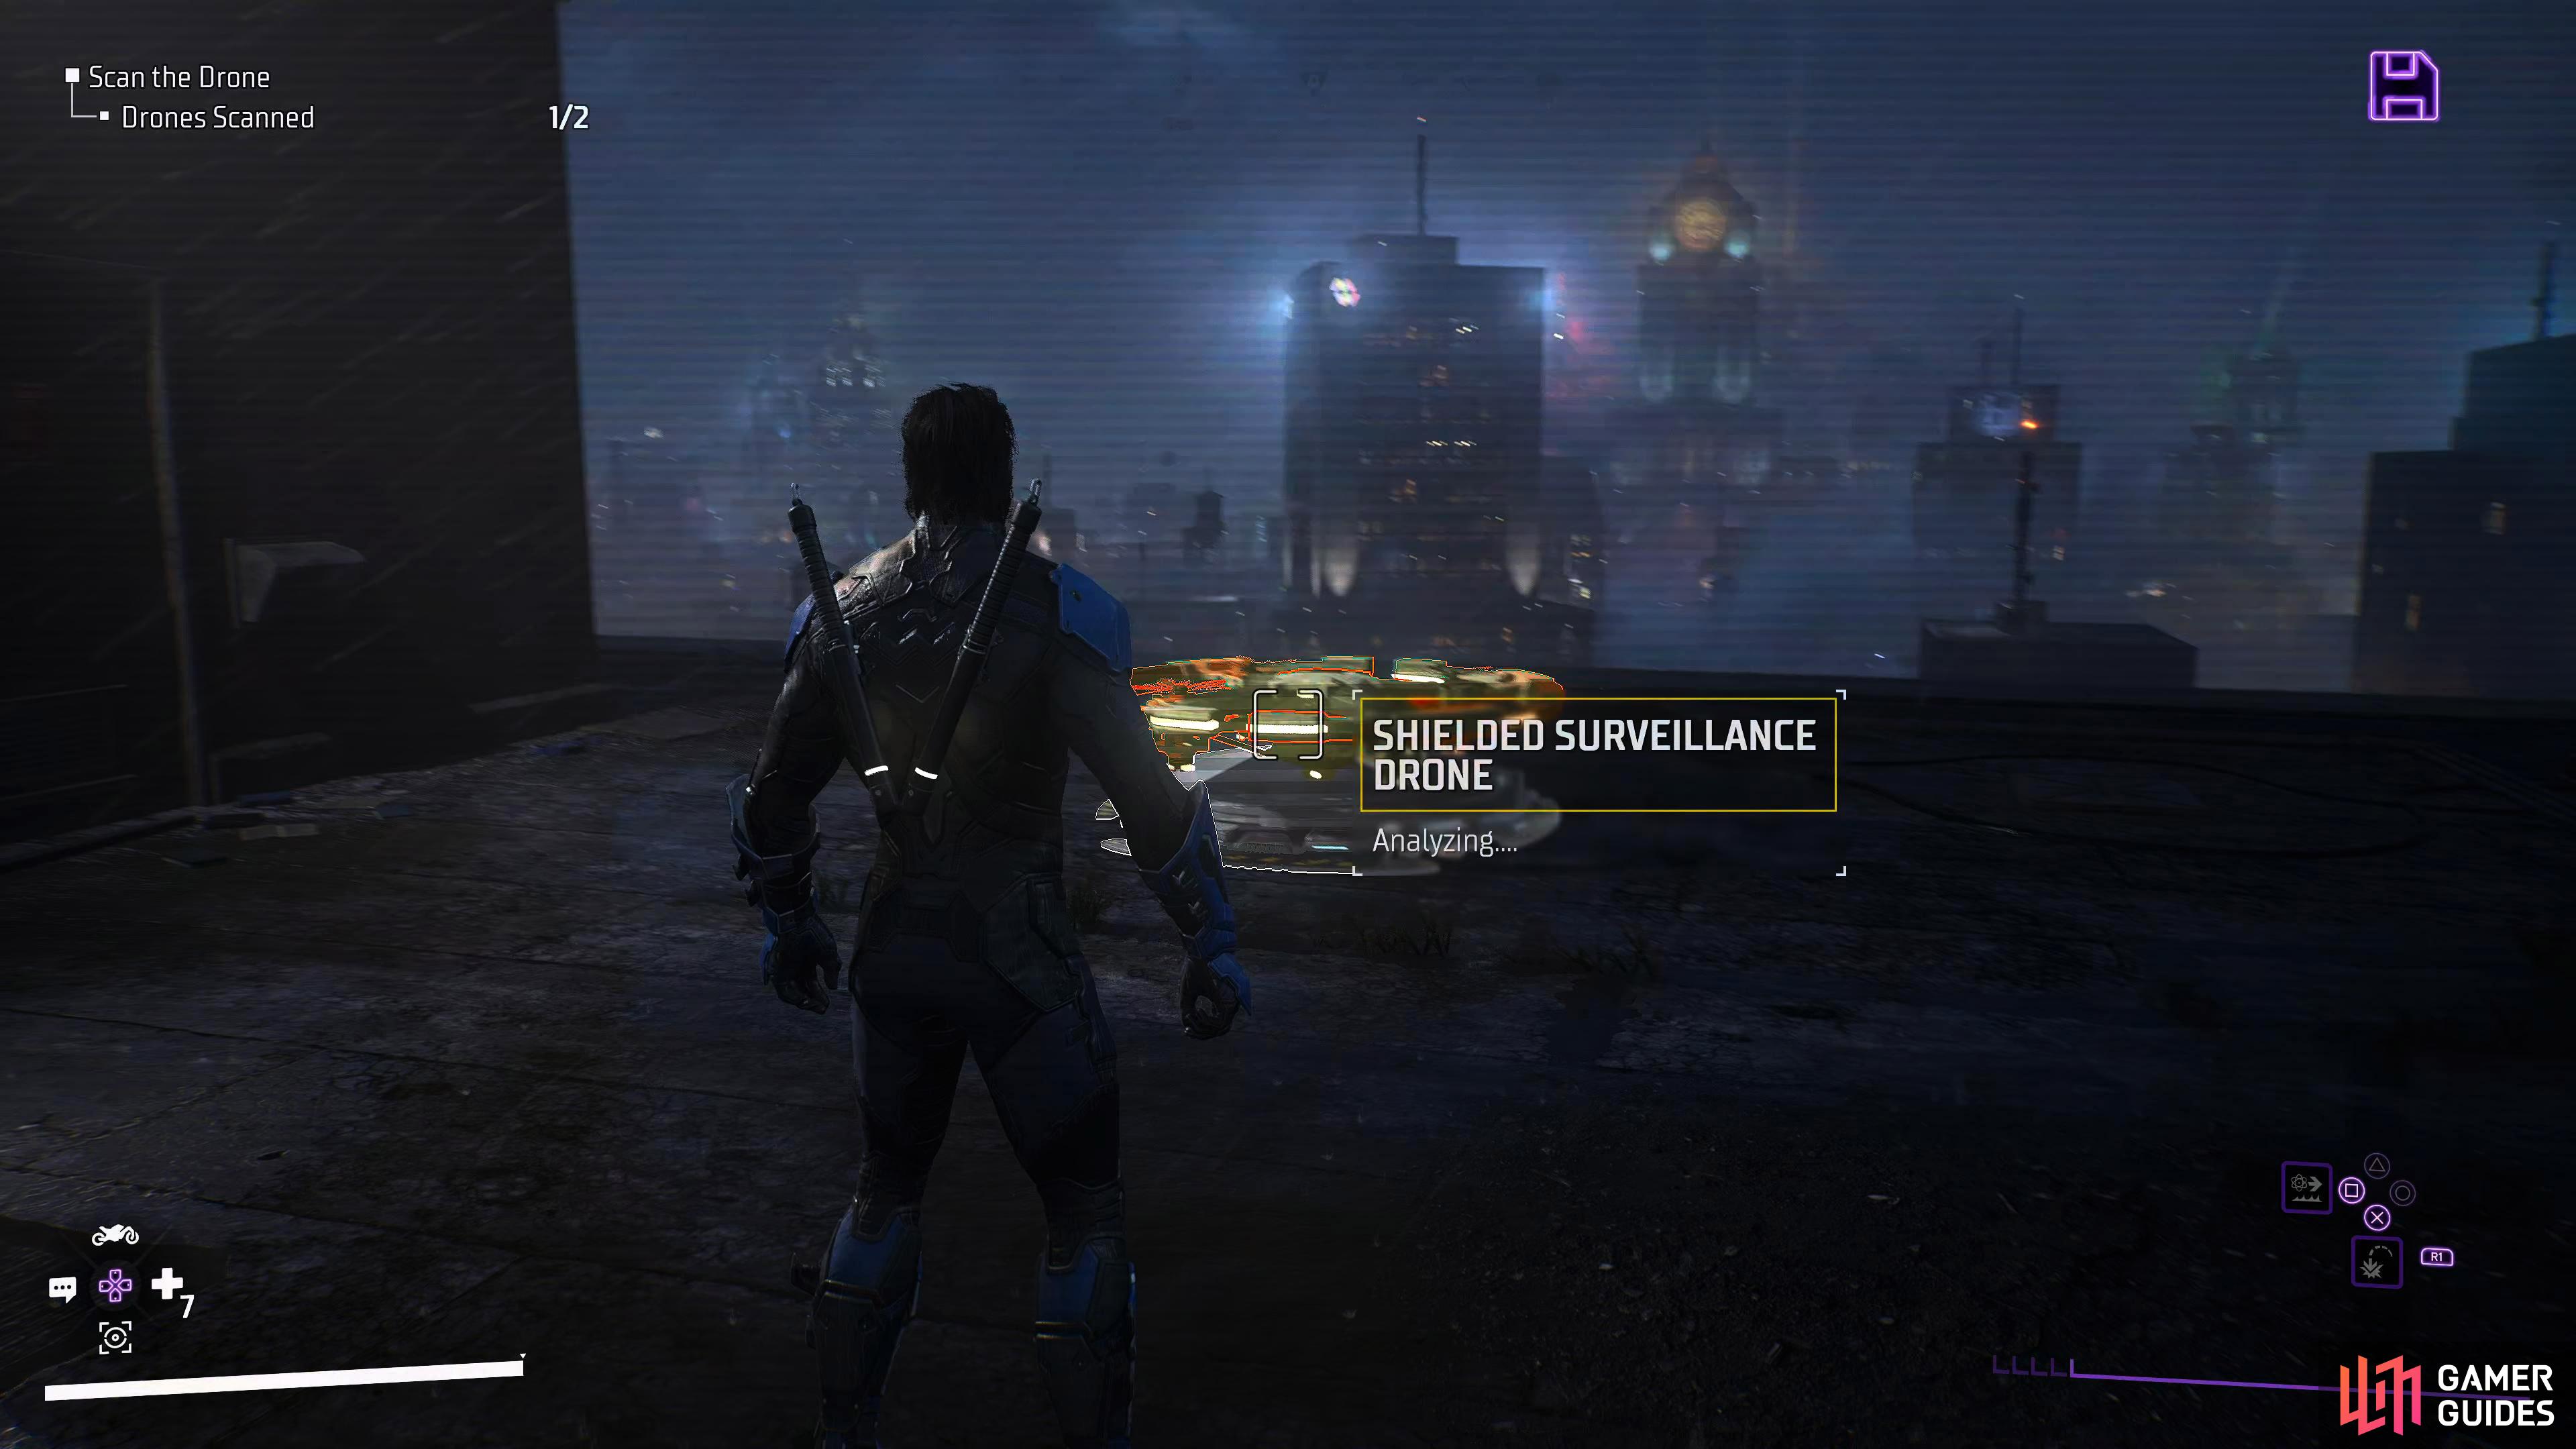 Wait at the recharge station on top of Gotham City Hall for the shielded drone.